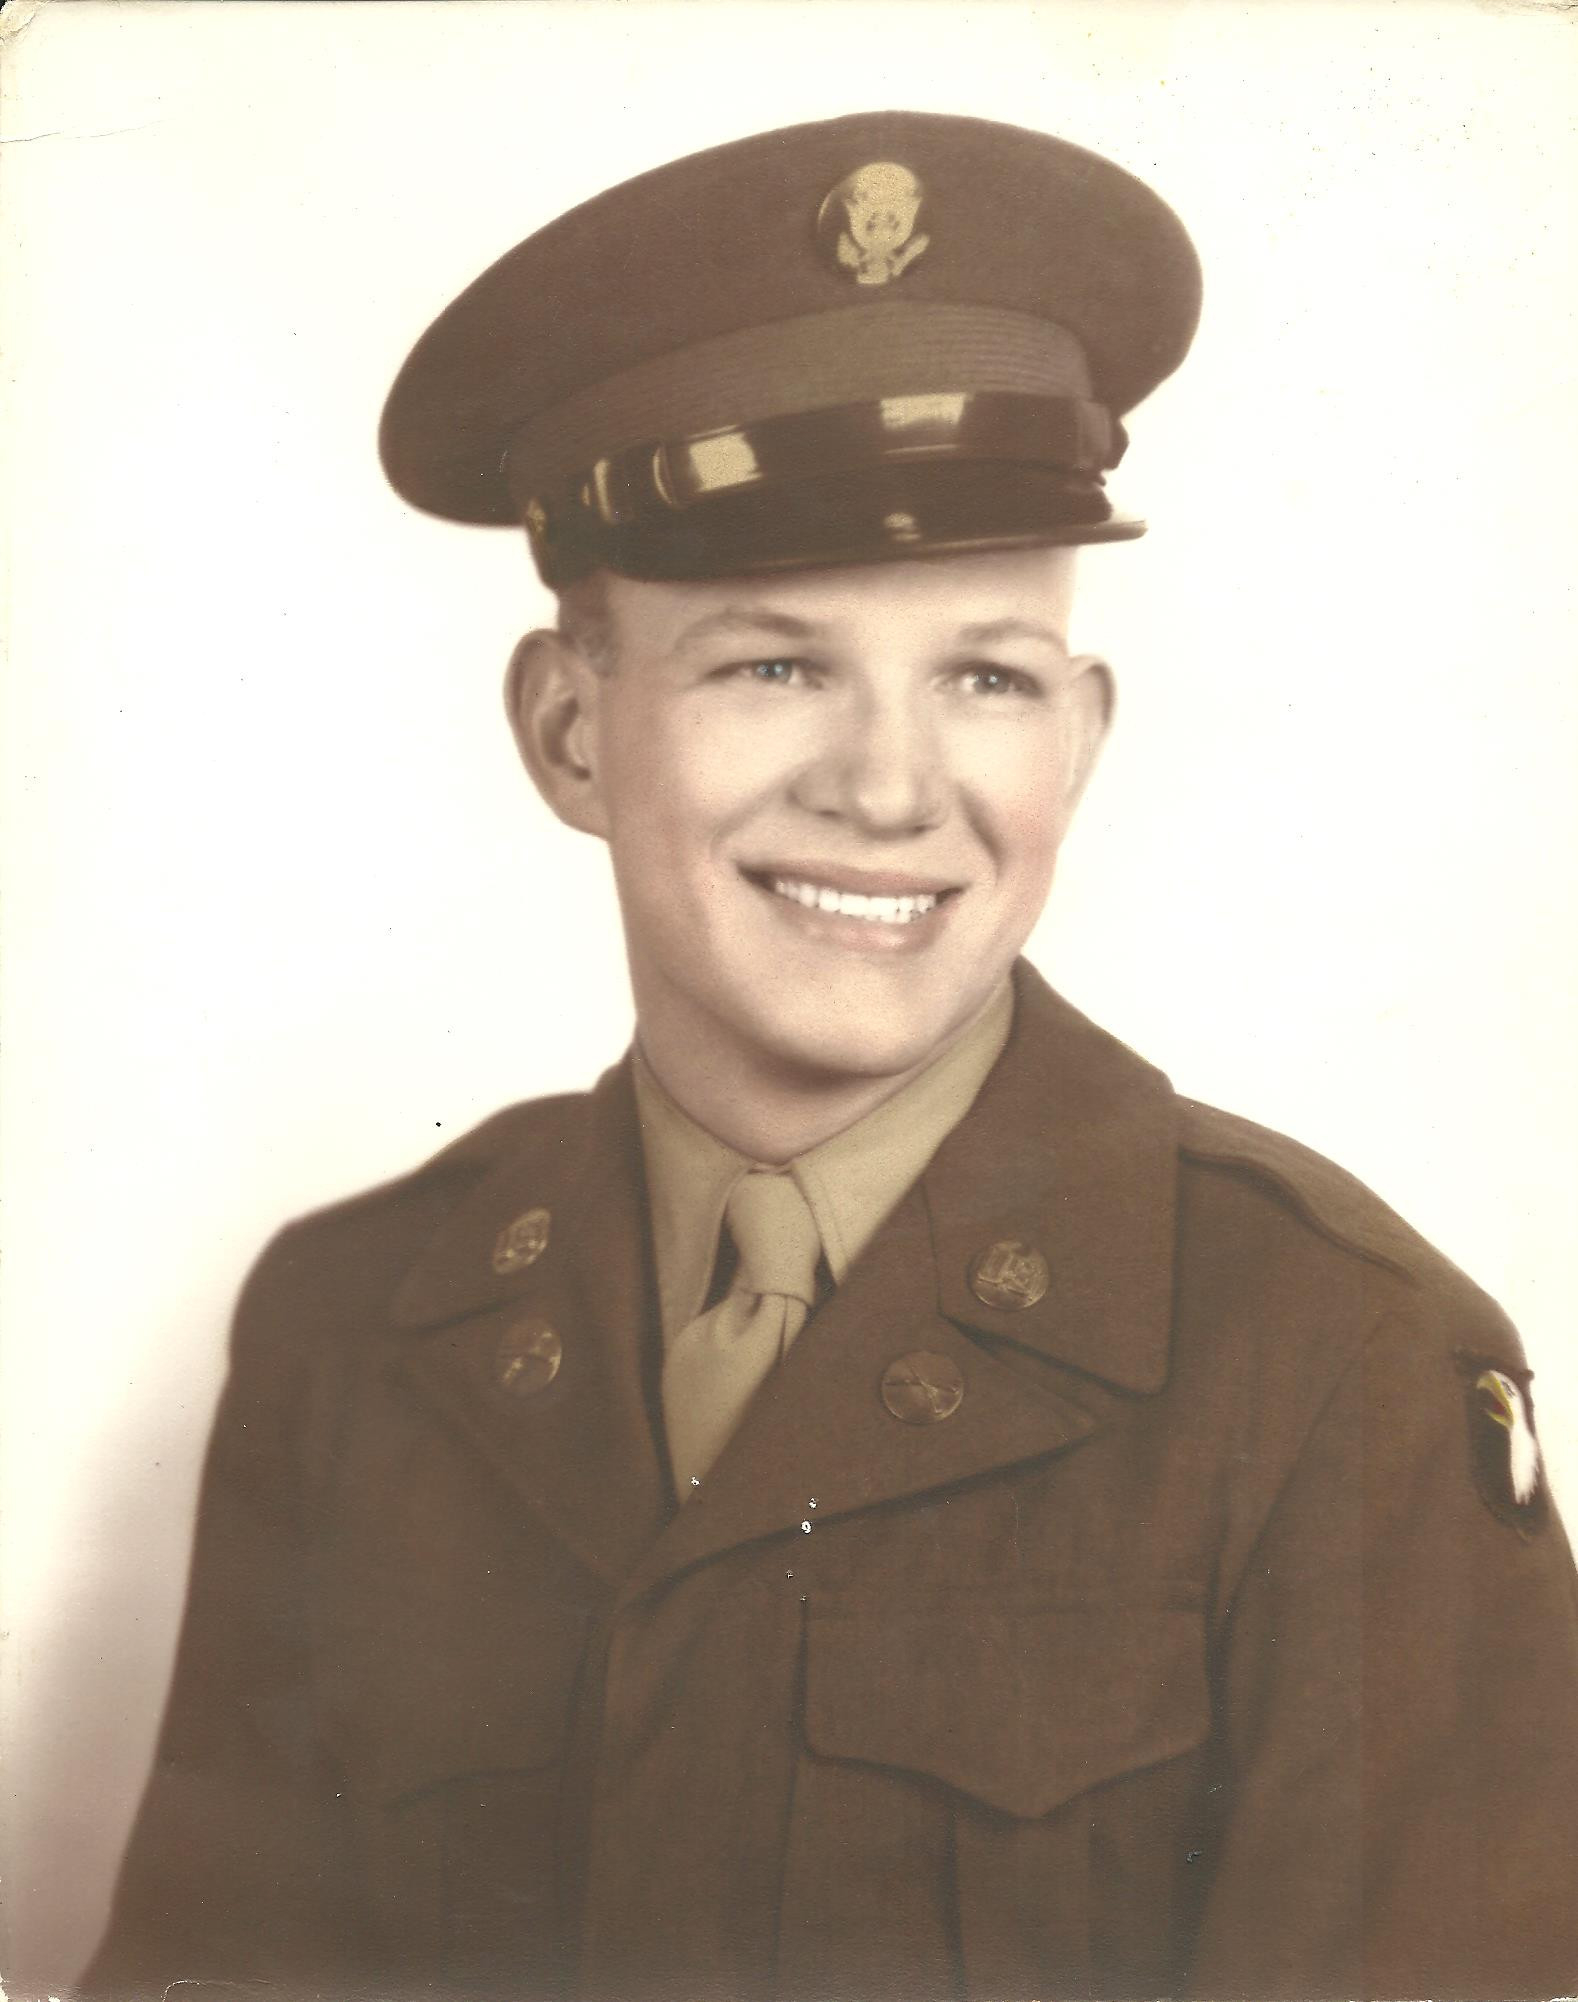 Corporal Paul E. March, US Army